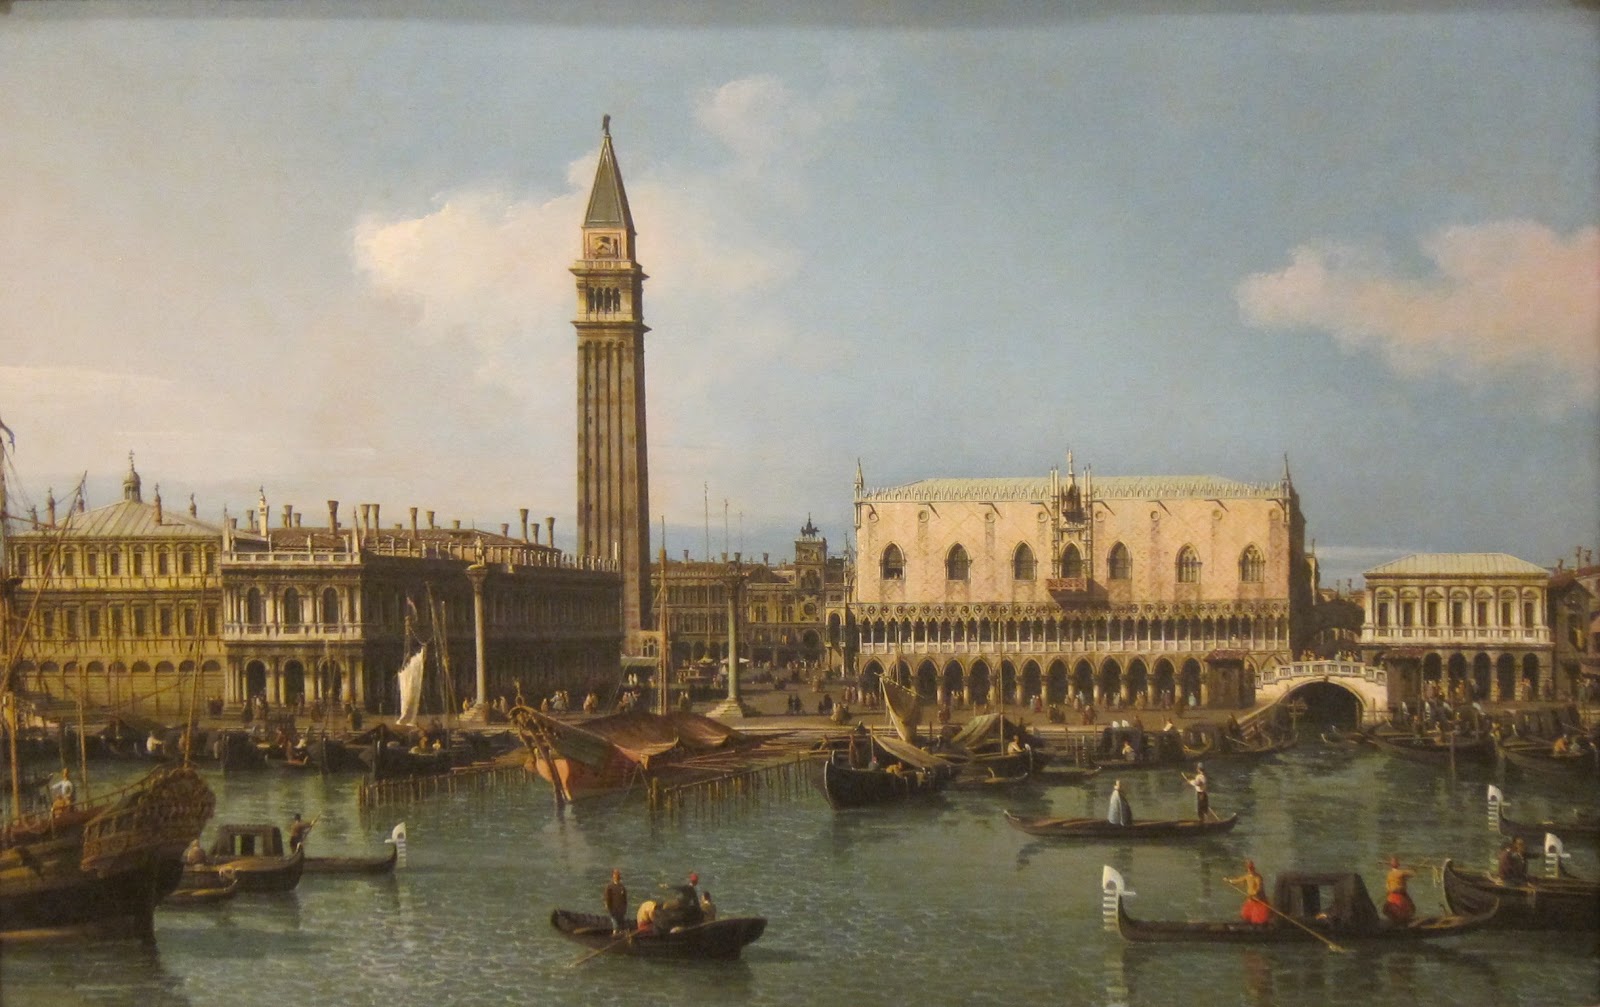 Canaletto-1697-1768 (30).jpg